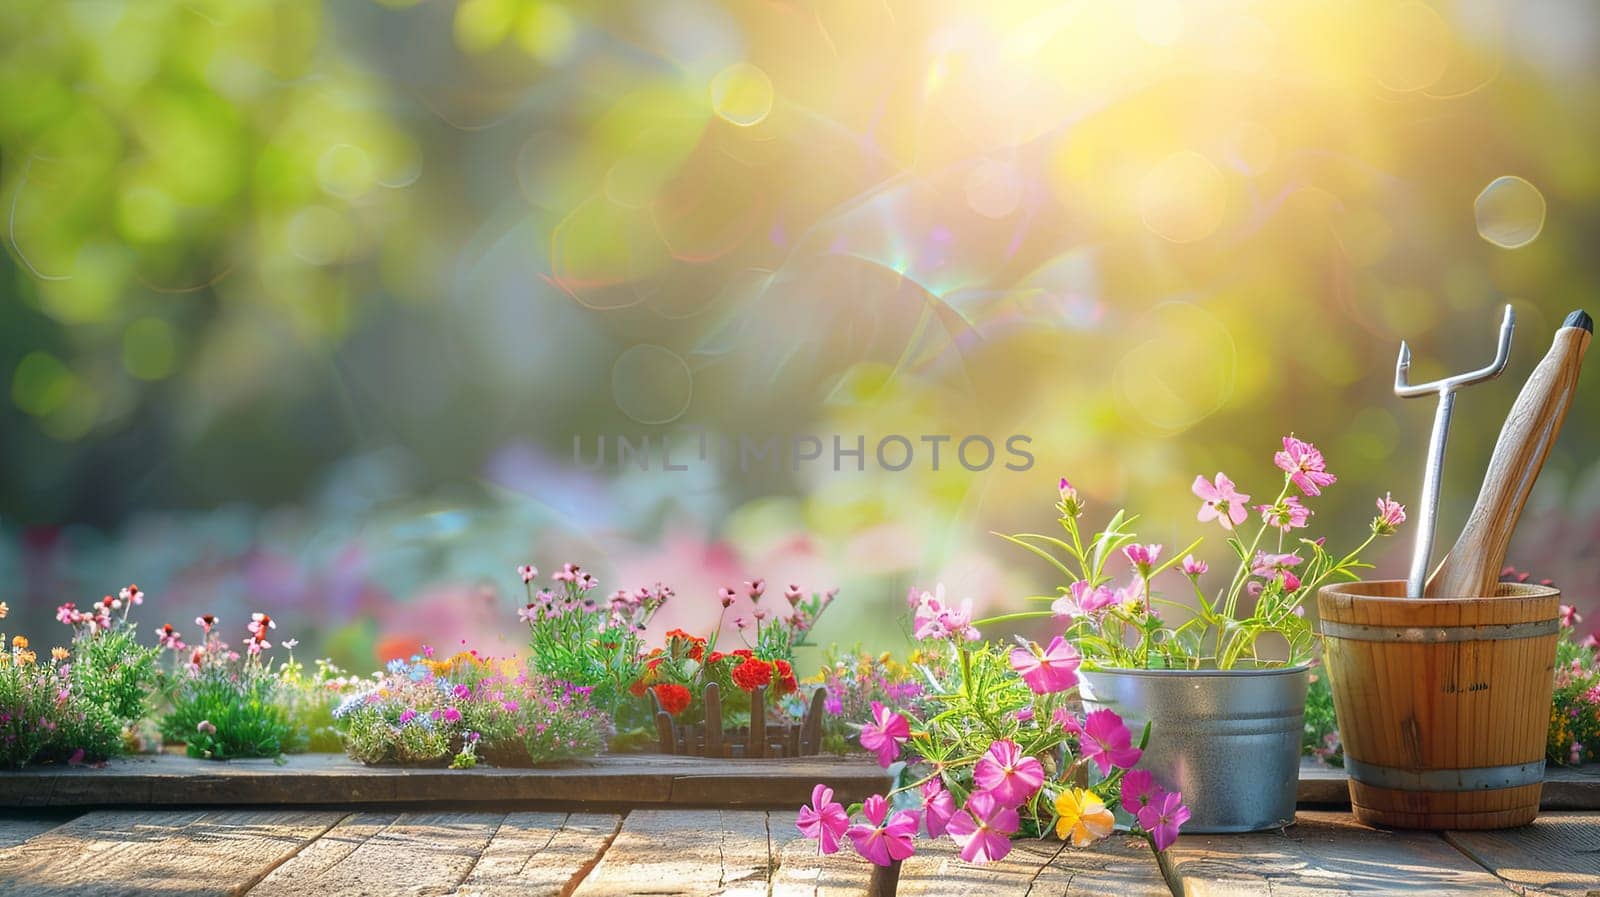 A wooden table adorned with vibrant flowers and various gardening tools, set against a blurred natural backdrop.